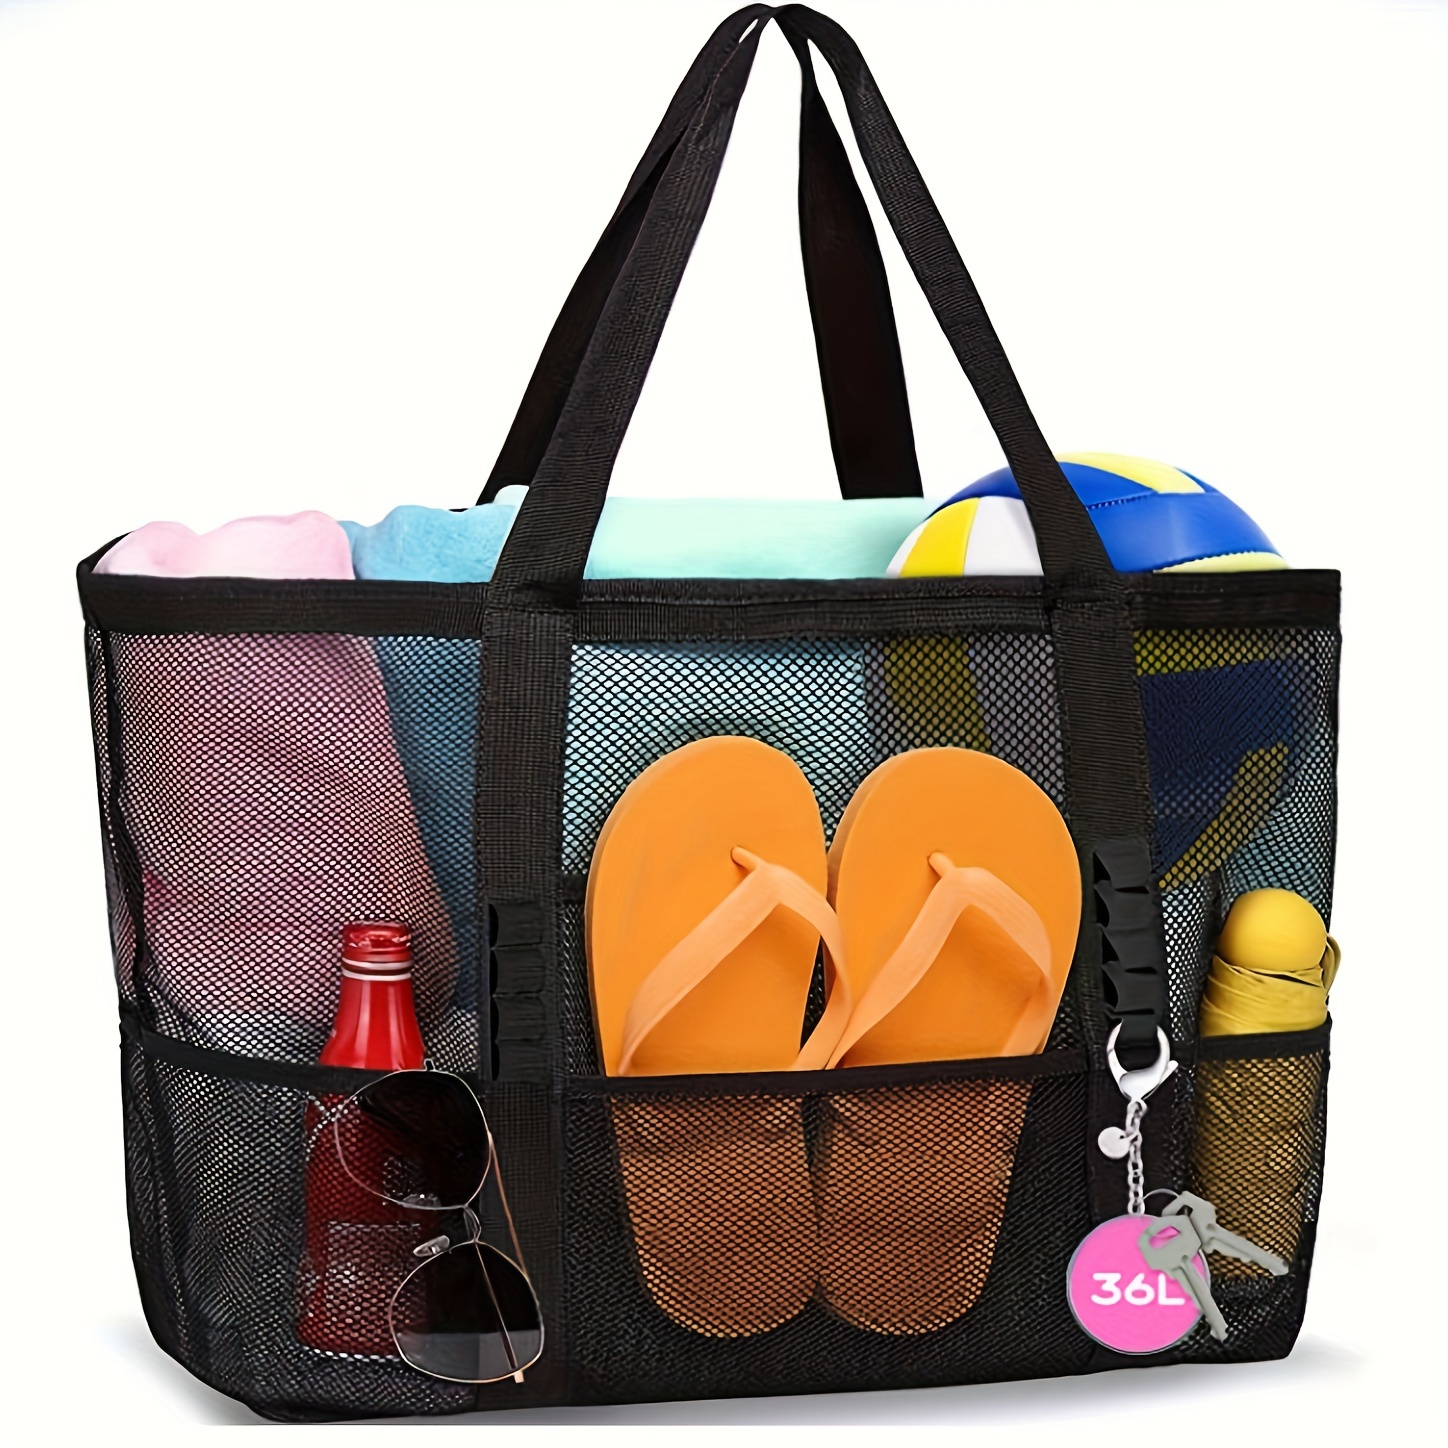 

Large Mesh Beach Bag - Extra Large Sandproof Swimming Tote Bag, Foldable, Lightweight, With Zipper, Extra Pockets To Place Toys And Vacation Essentials